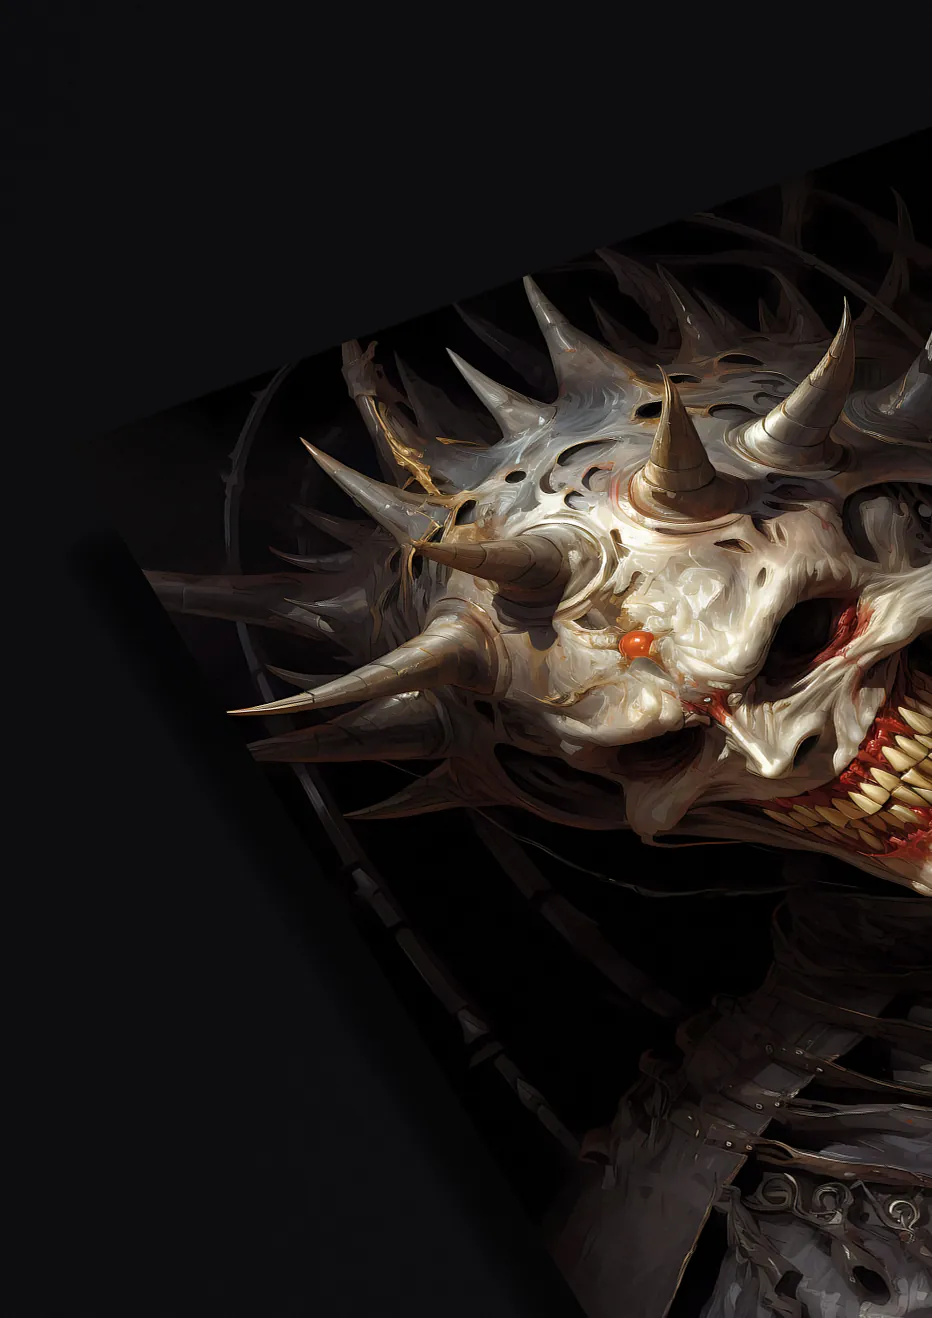 Artwork depicting the mysterious 'Mad Jester' with an unsettling grin, symbolizing madness and chaos.